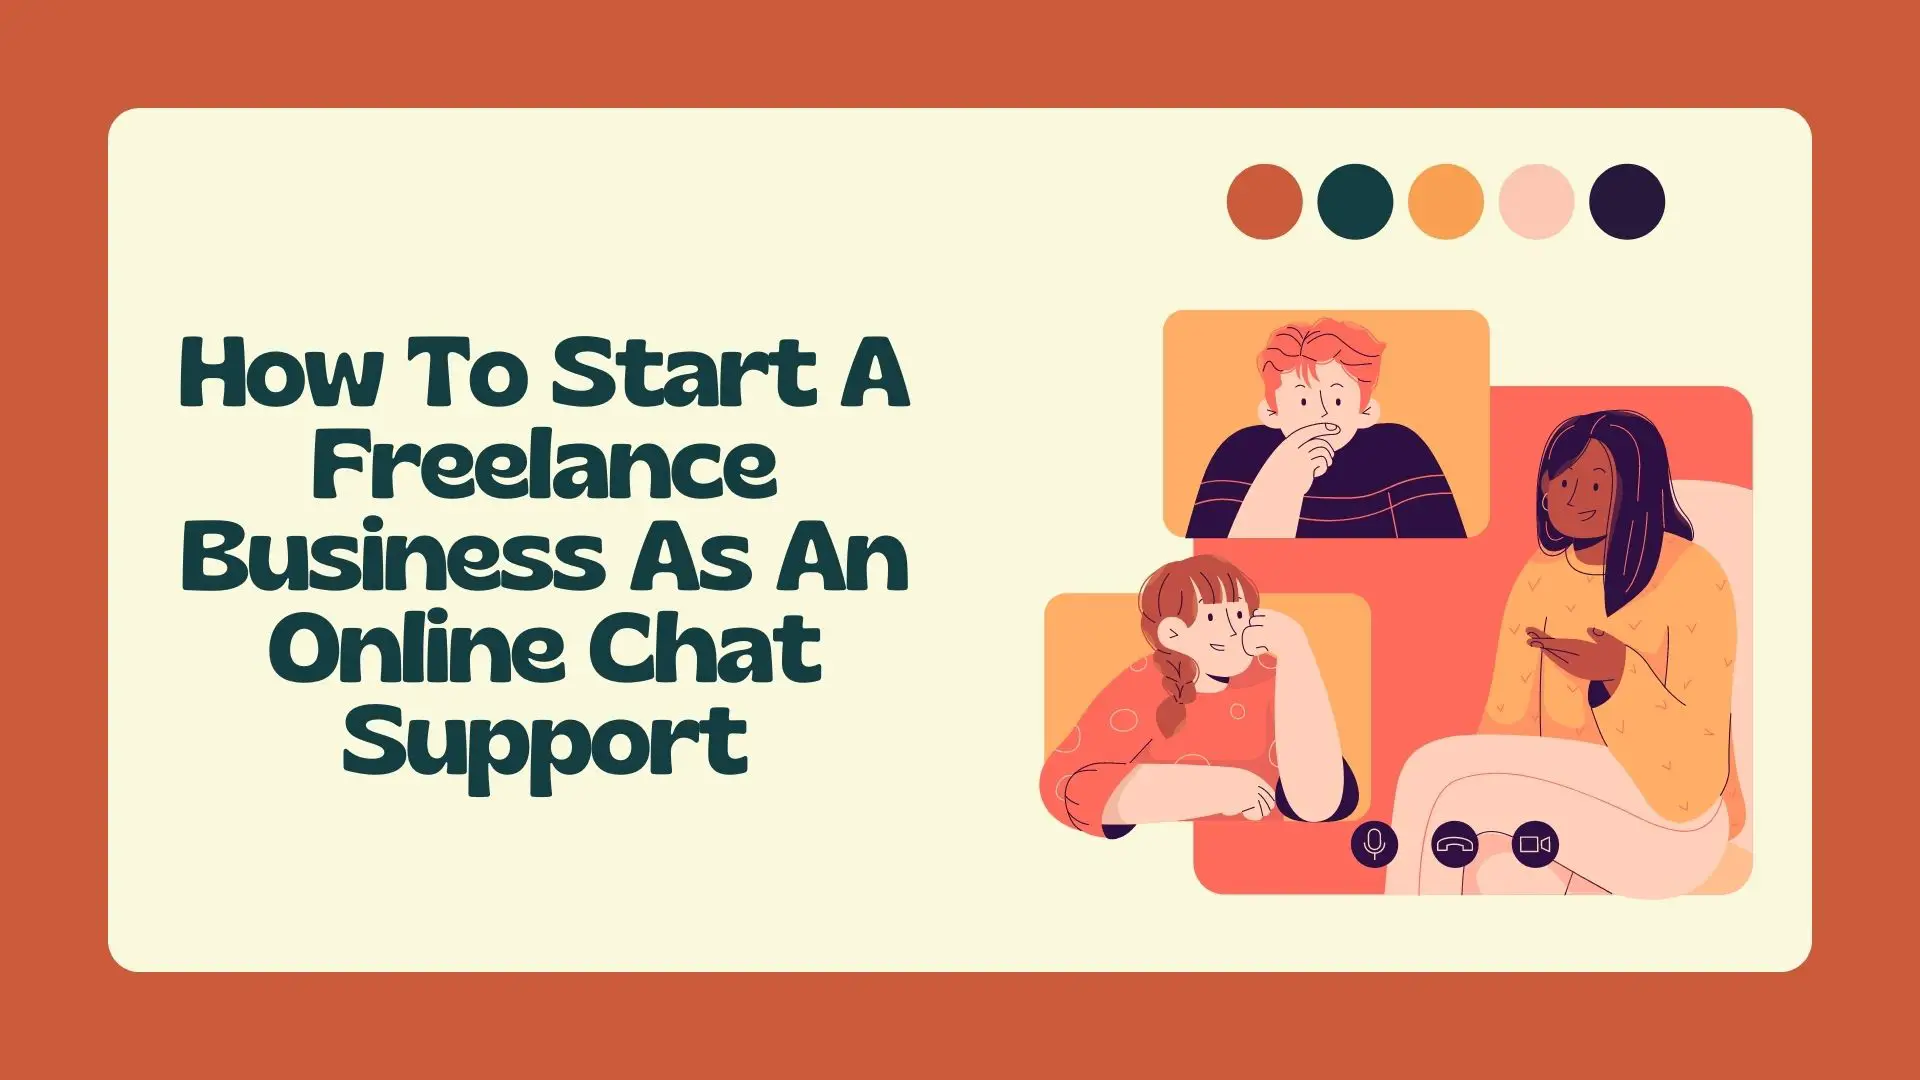 How To Start A Freelance Business As An Online Chat Support